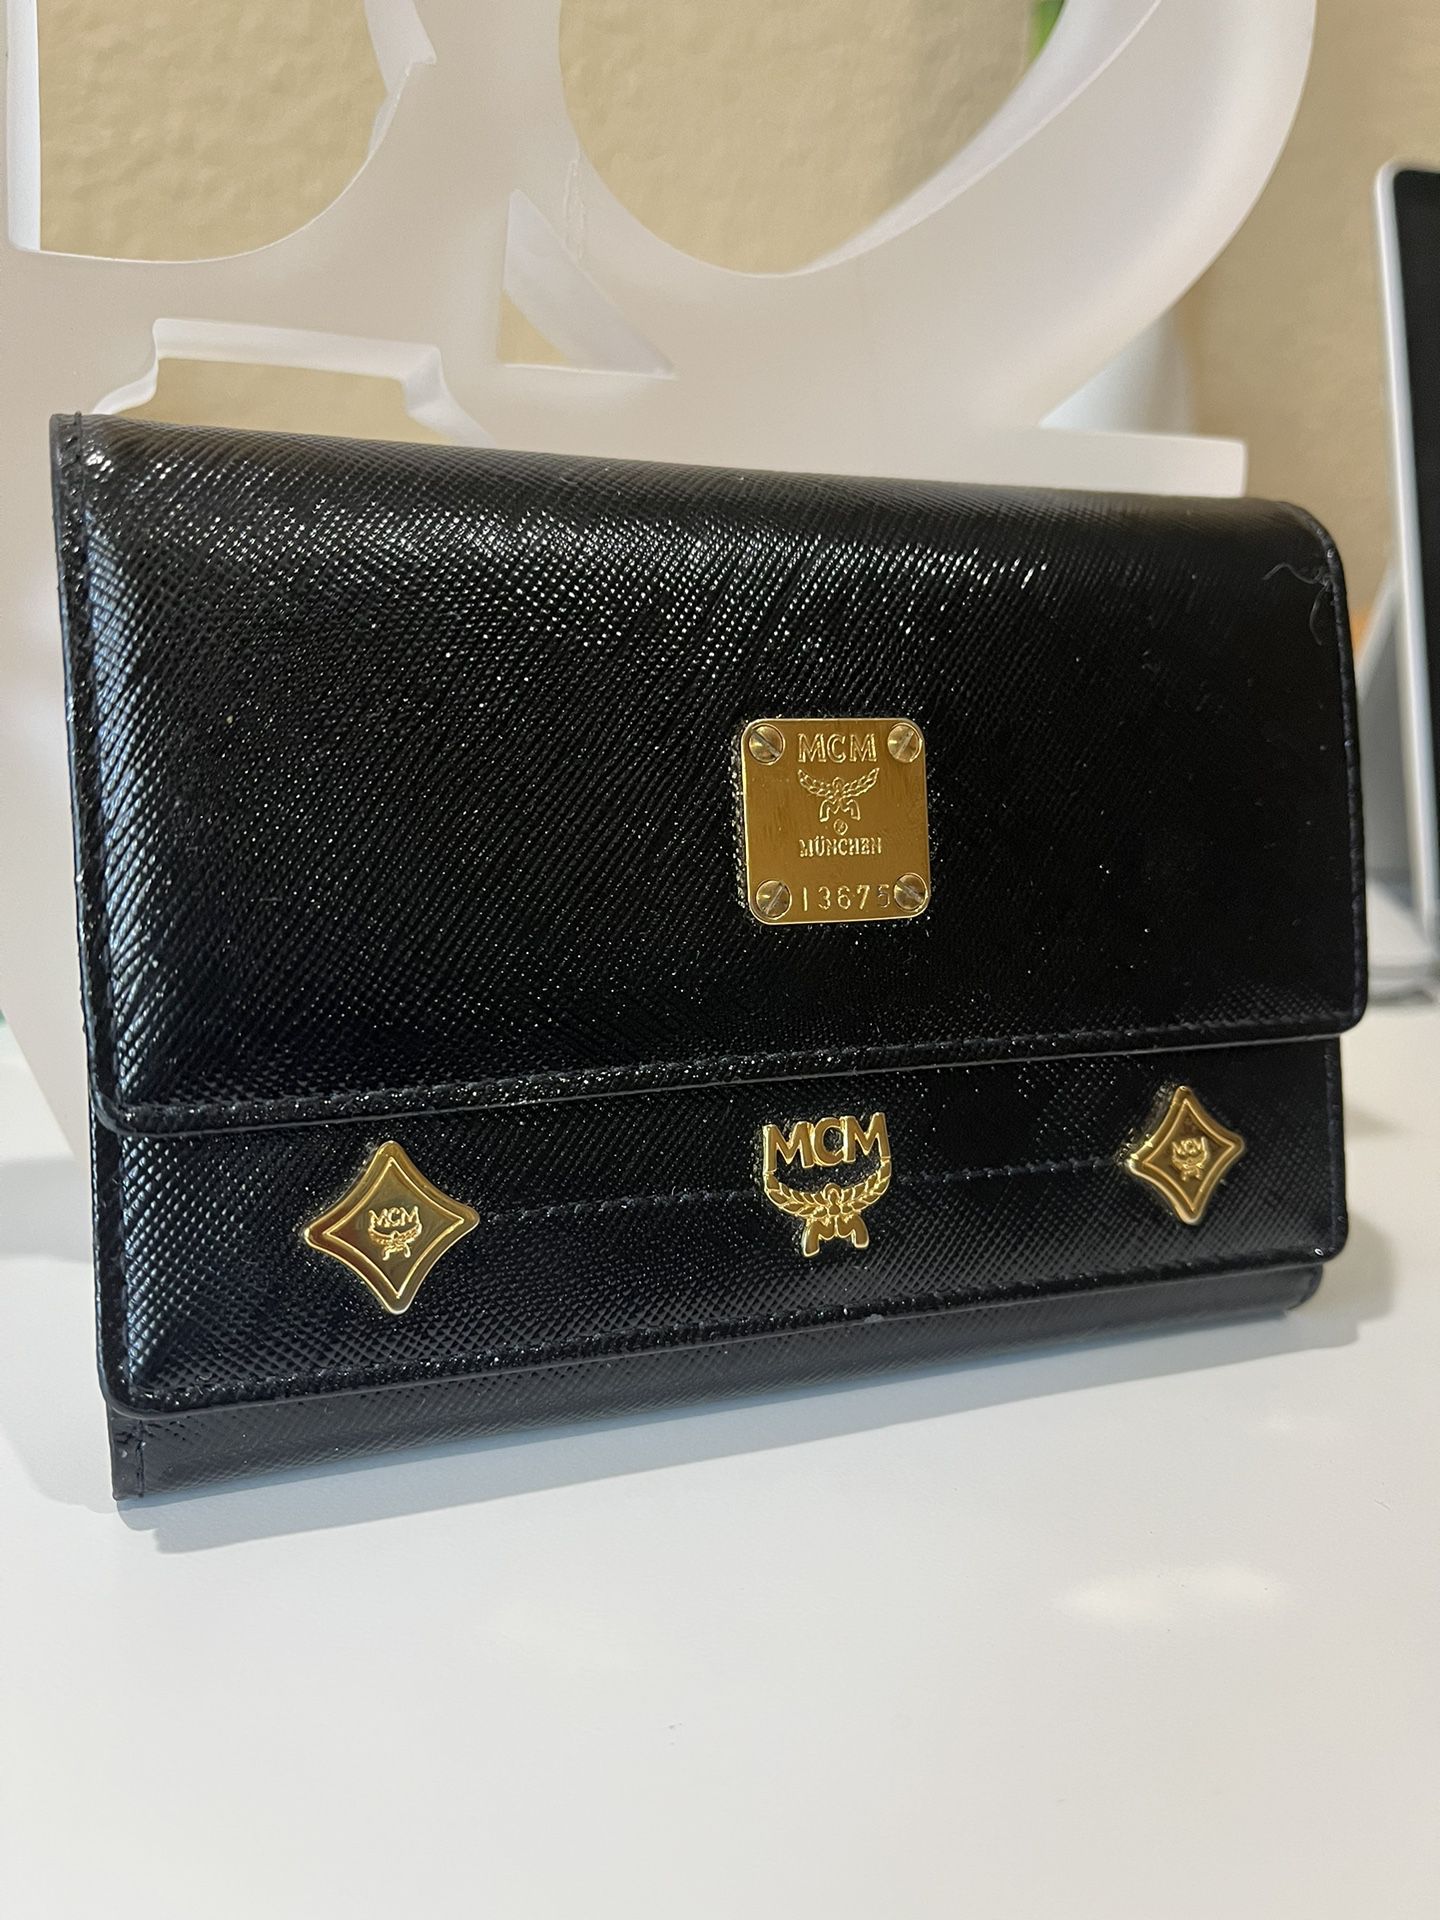 Beverly Hills Polo Club Wallets for Men